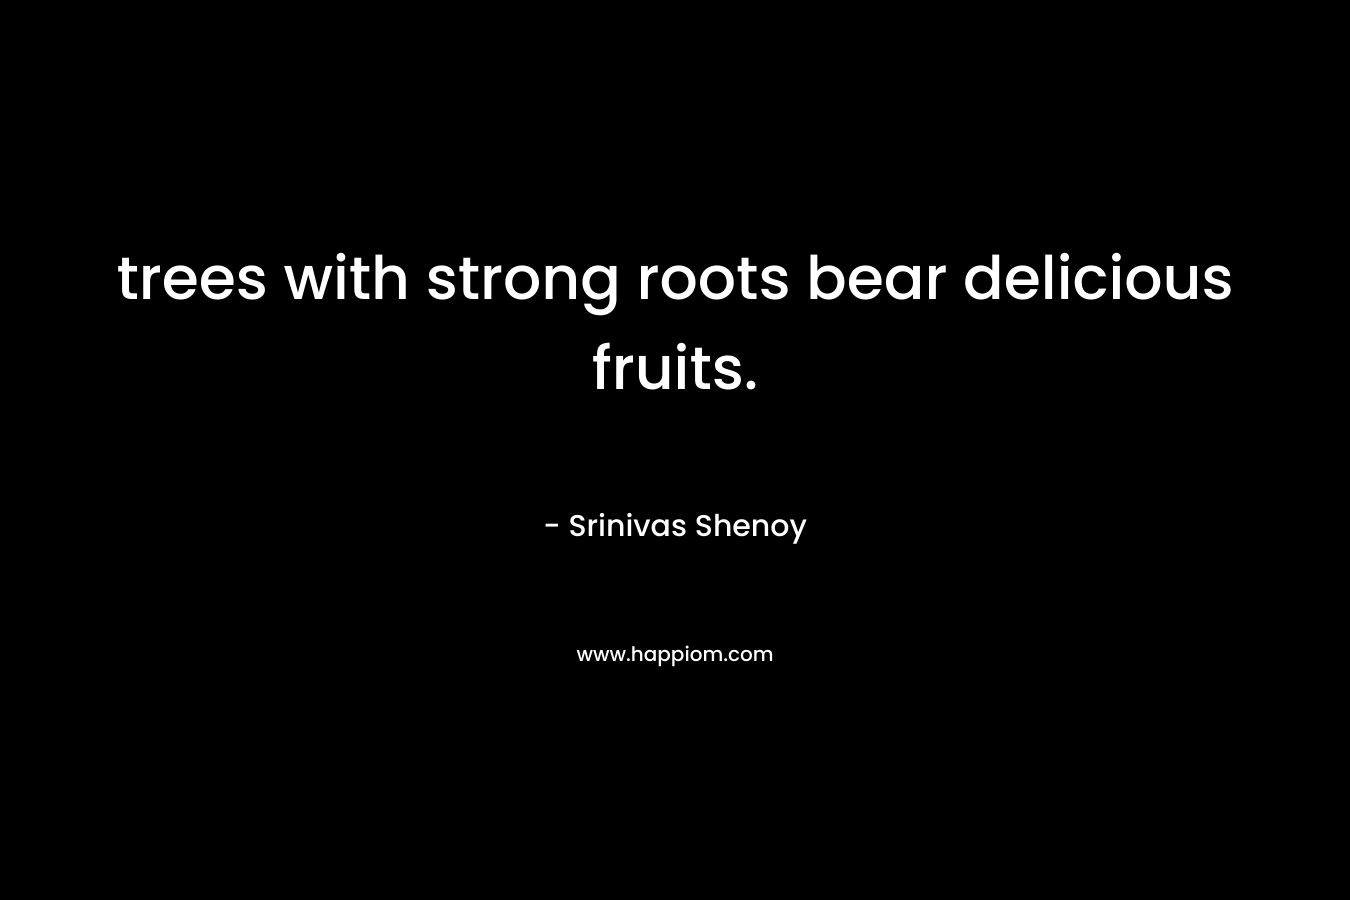 trees with strong roots bear delicious fruits.